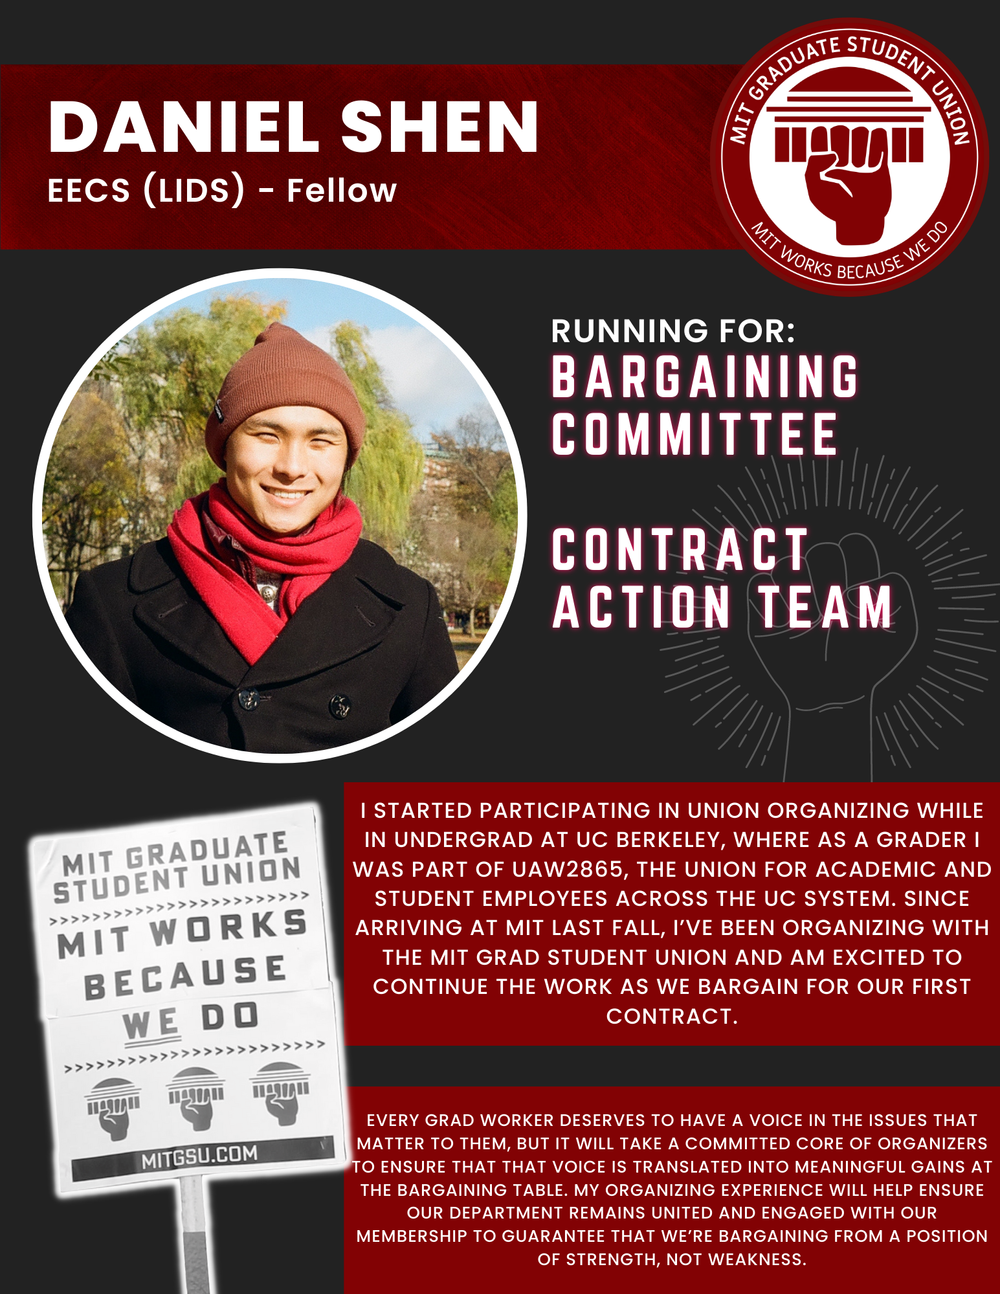  DANIEL SHEN EECS (LIDS) - Fellow   RUNNING FOR: Bargaining Committee  Contract Action Team  I STARTED PARTICIPATING IN UNION ORGANIZING WHILE IN UNDERGRAD AT UC BERKELEY, WHERE AS A GRADER I WAS PART OF UAW2865, THE UNION FOR ACADEMIC AND STUDENT EM